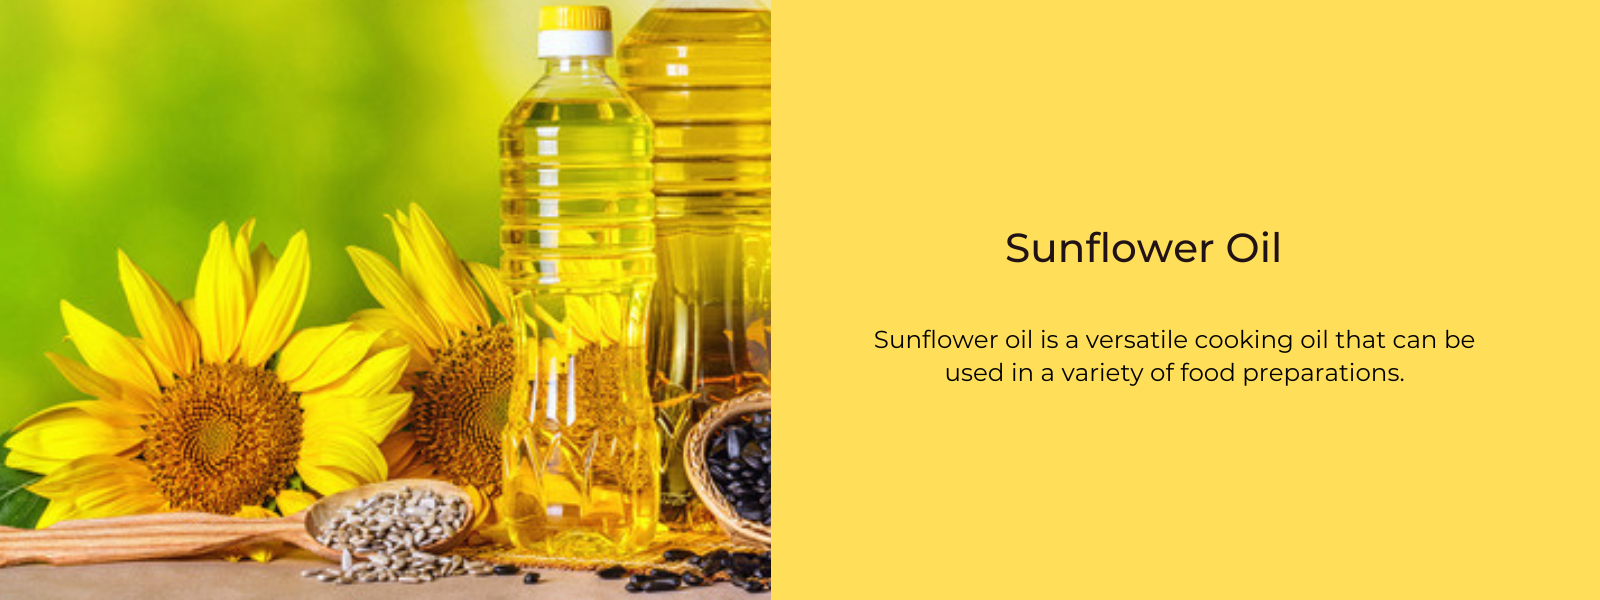 Sunflower Oil - Health Benefits, Uses and Important Facts